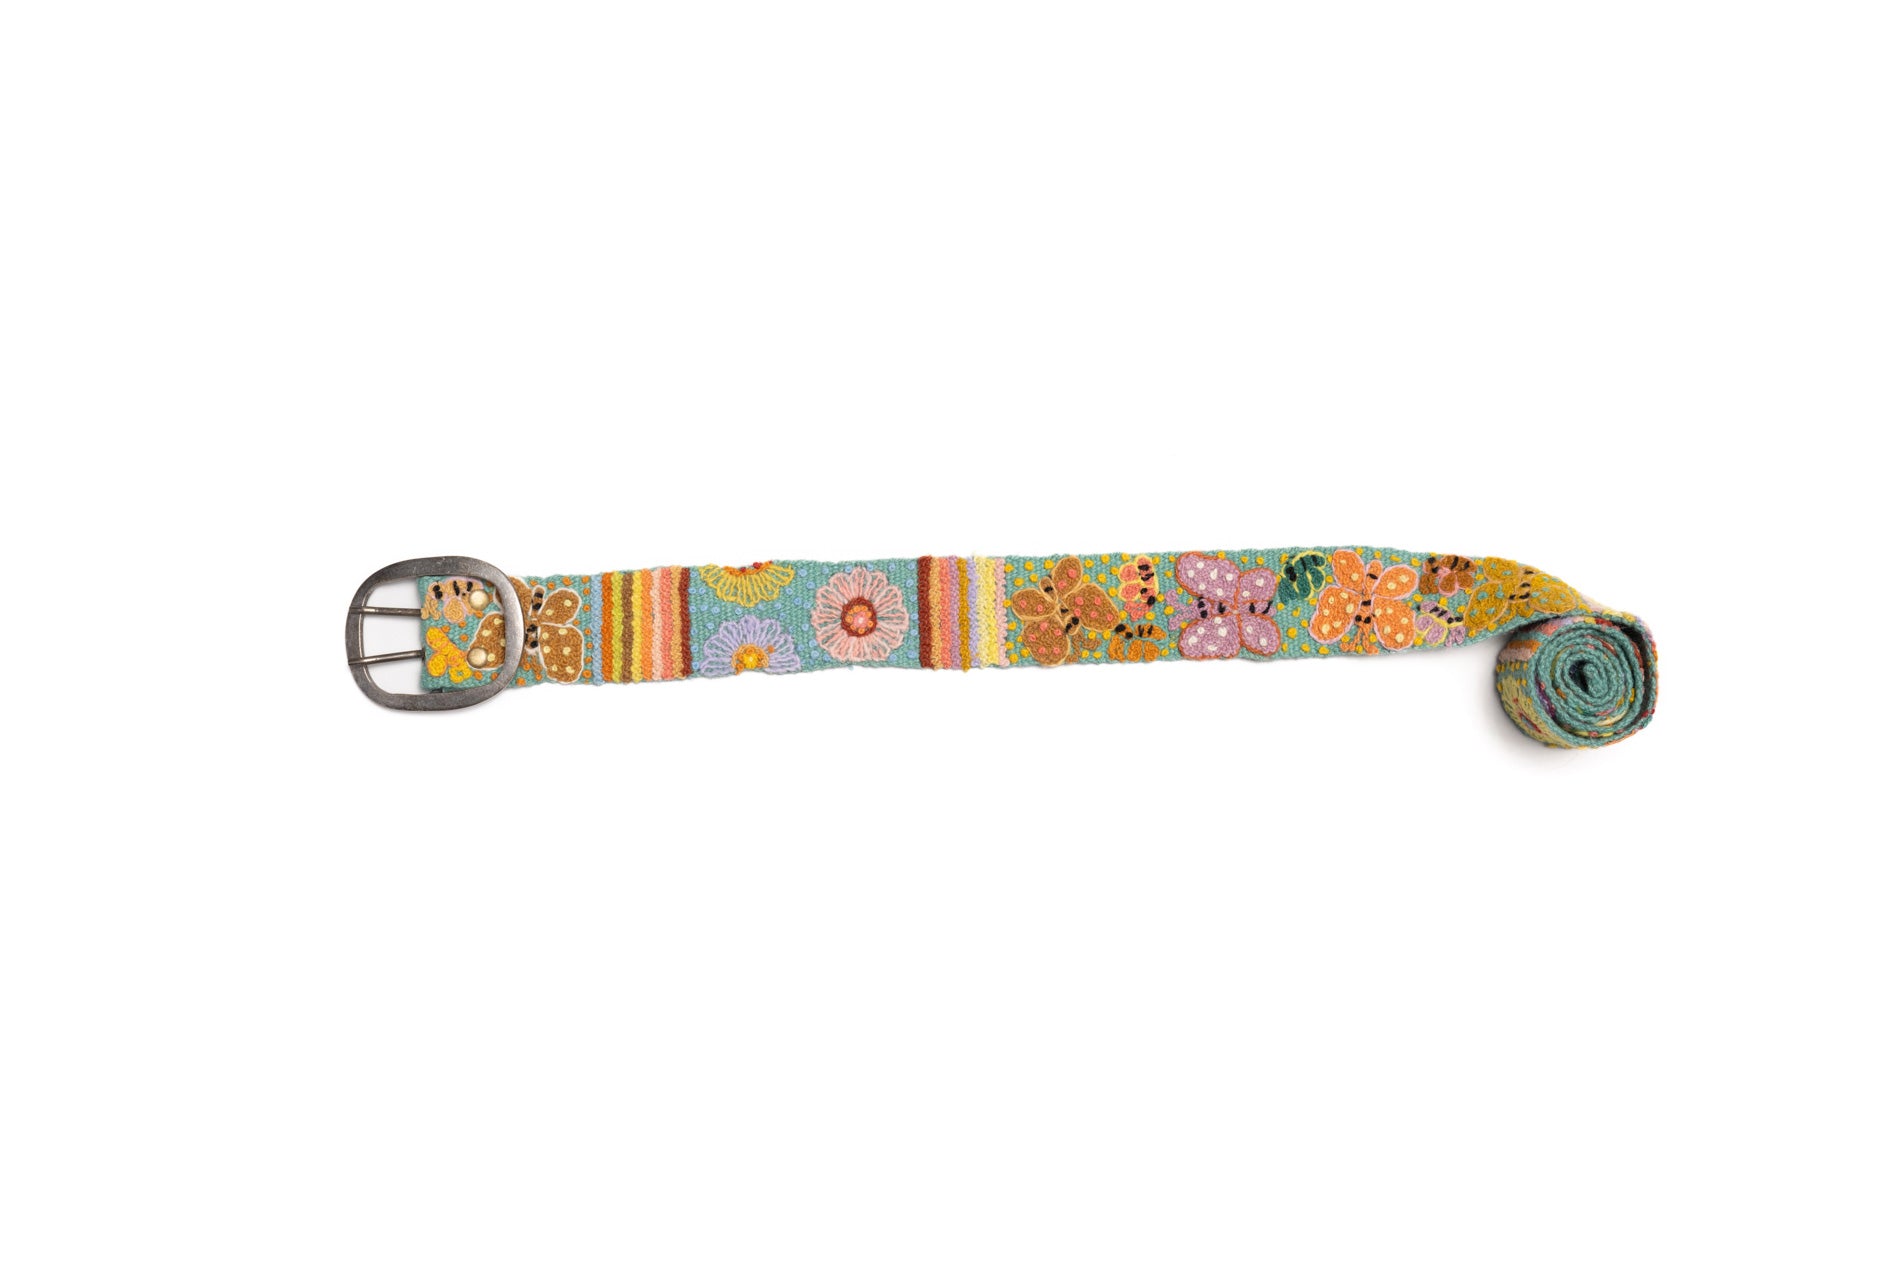 Fair Trade handmade embroidered belt  in colorful floral butterfly design